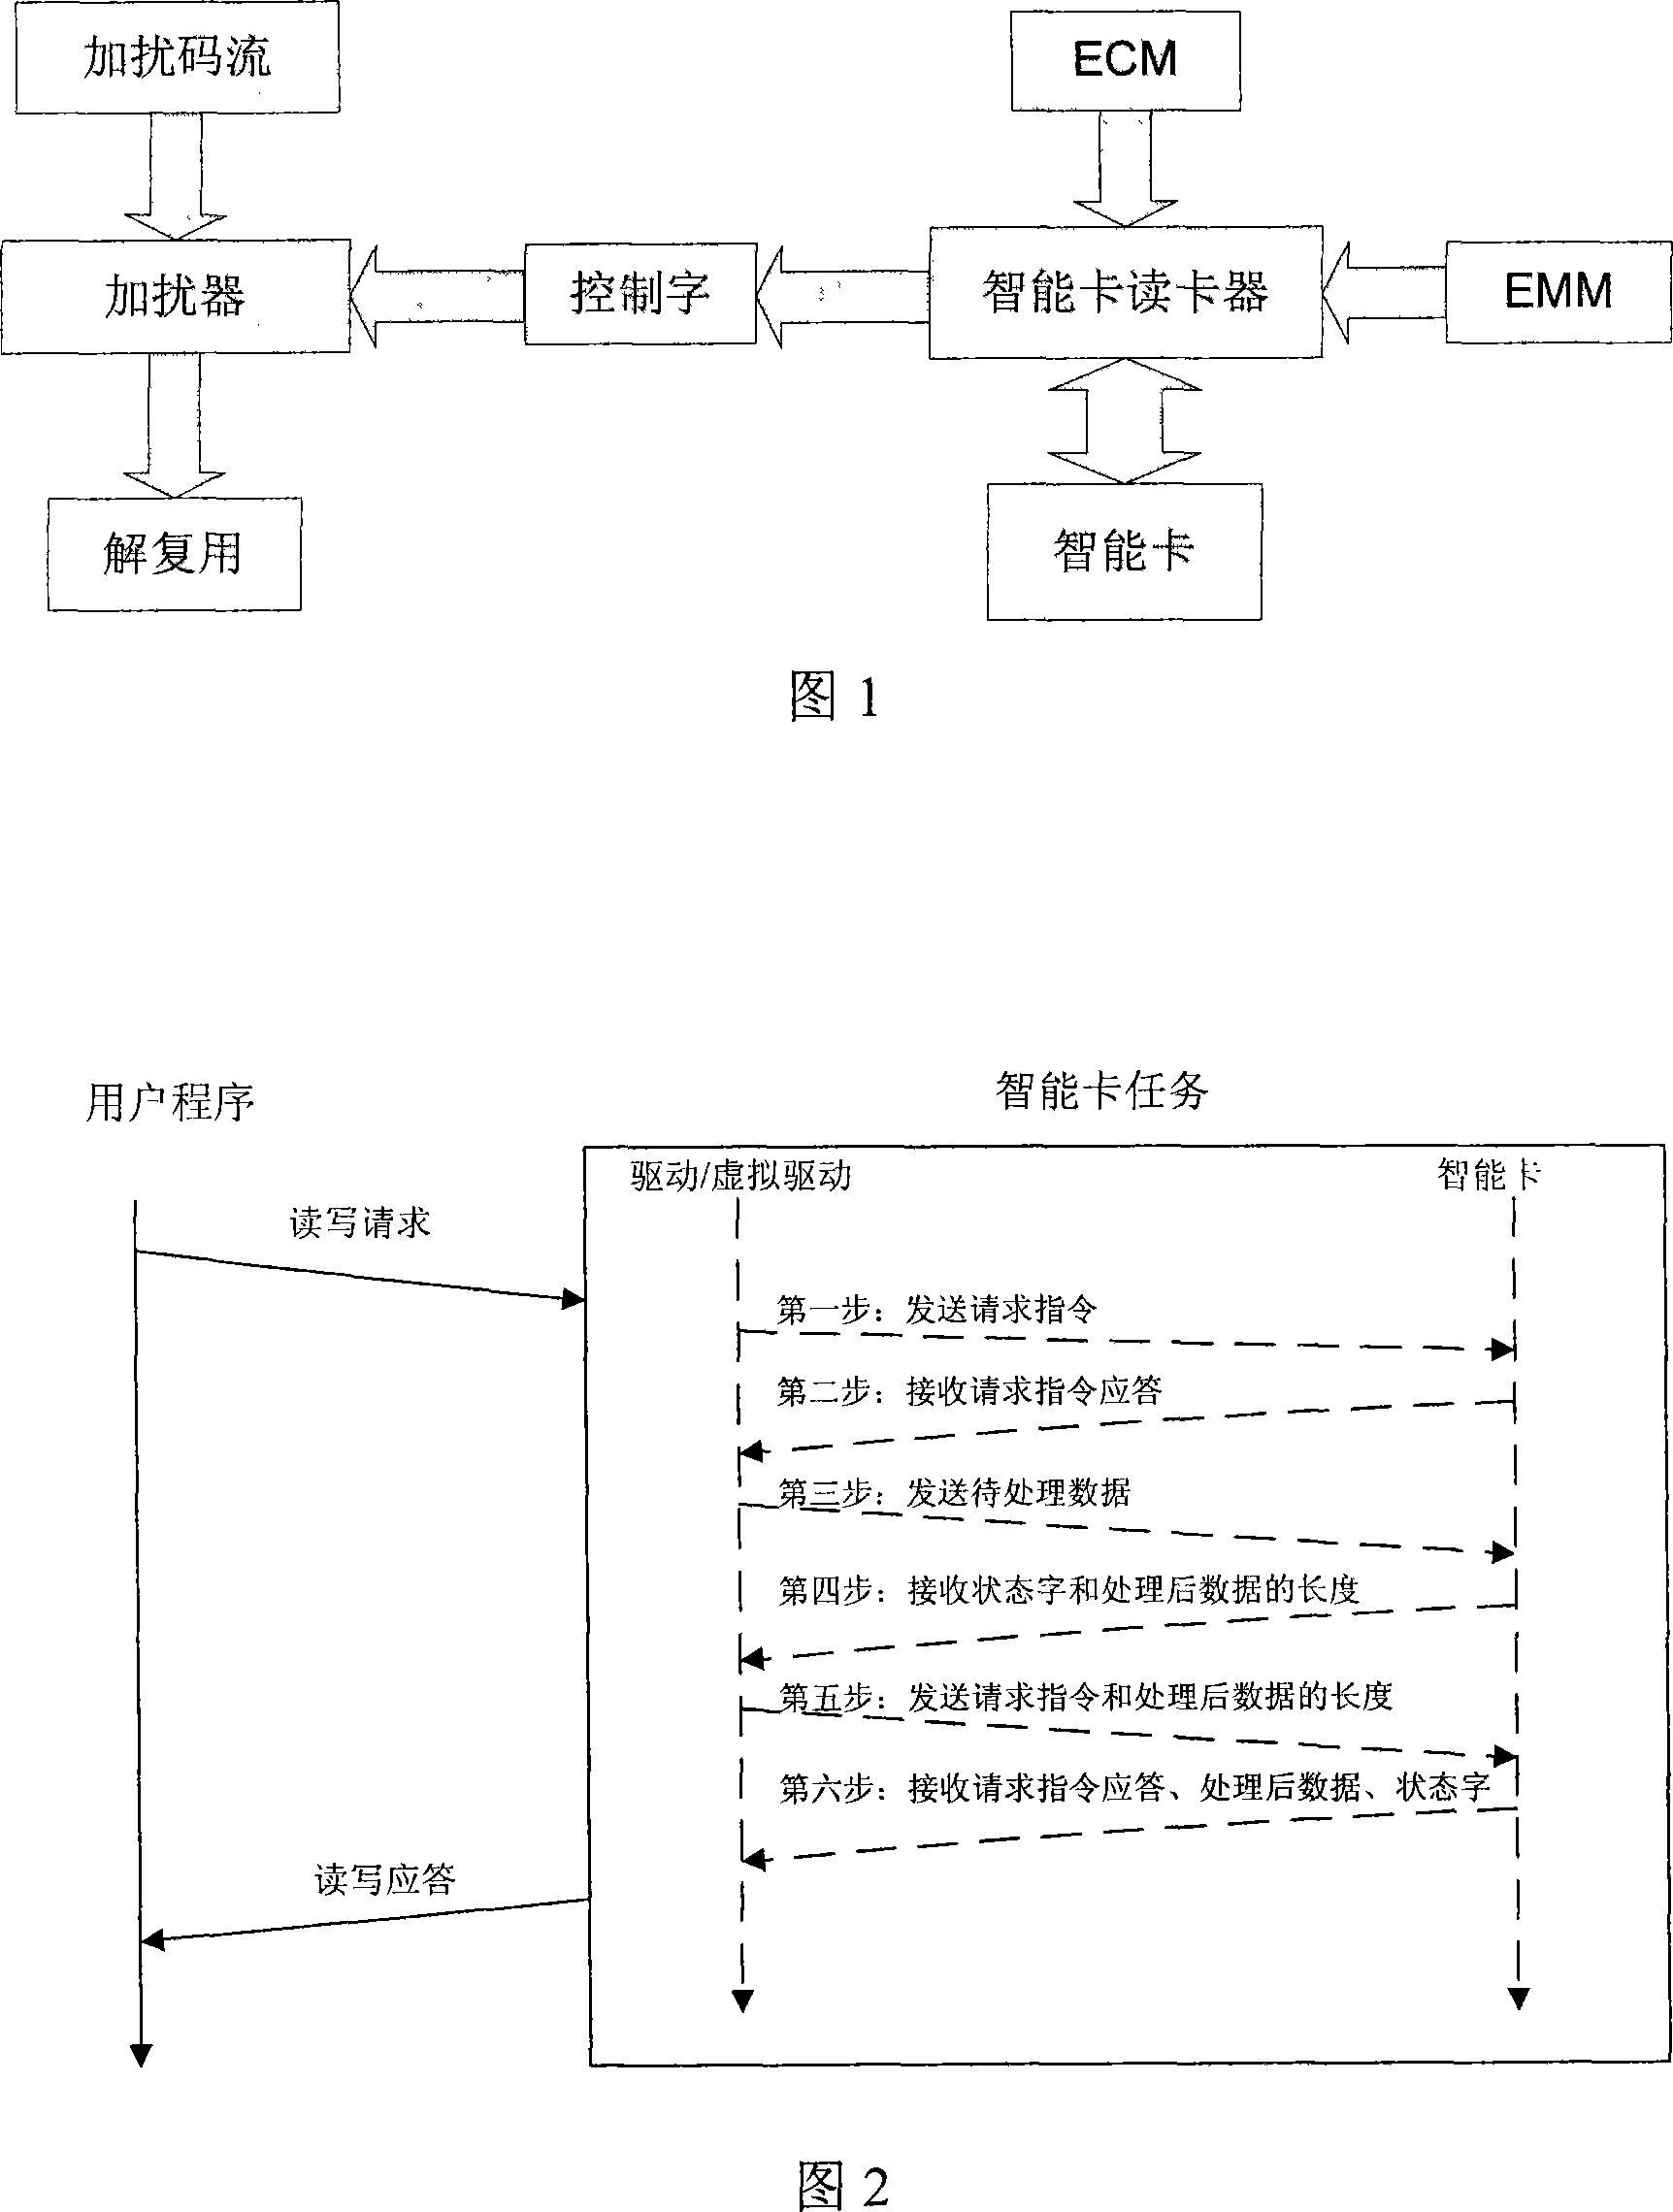 Method for realizing multi-task access smart card